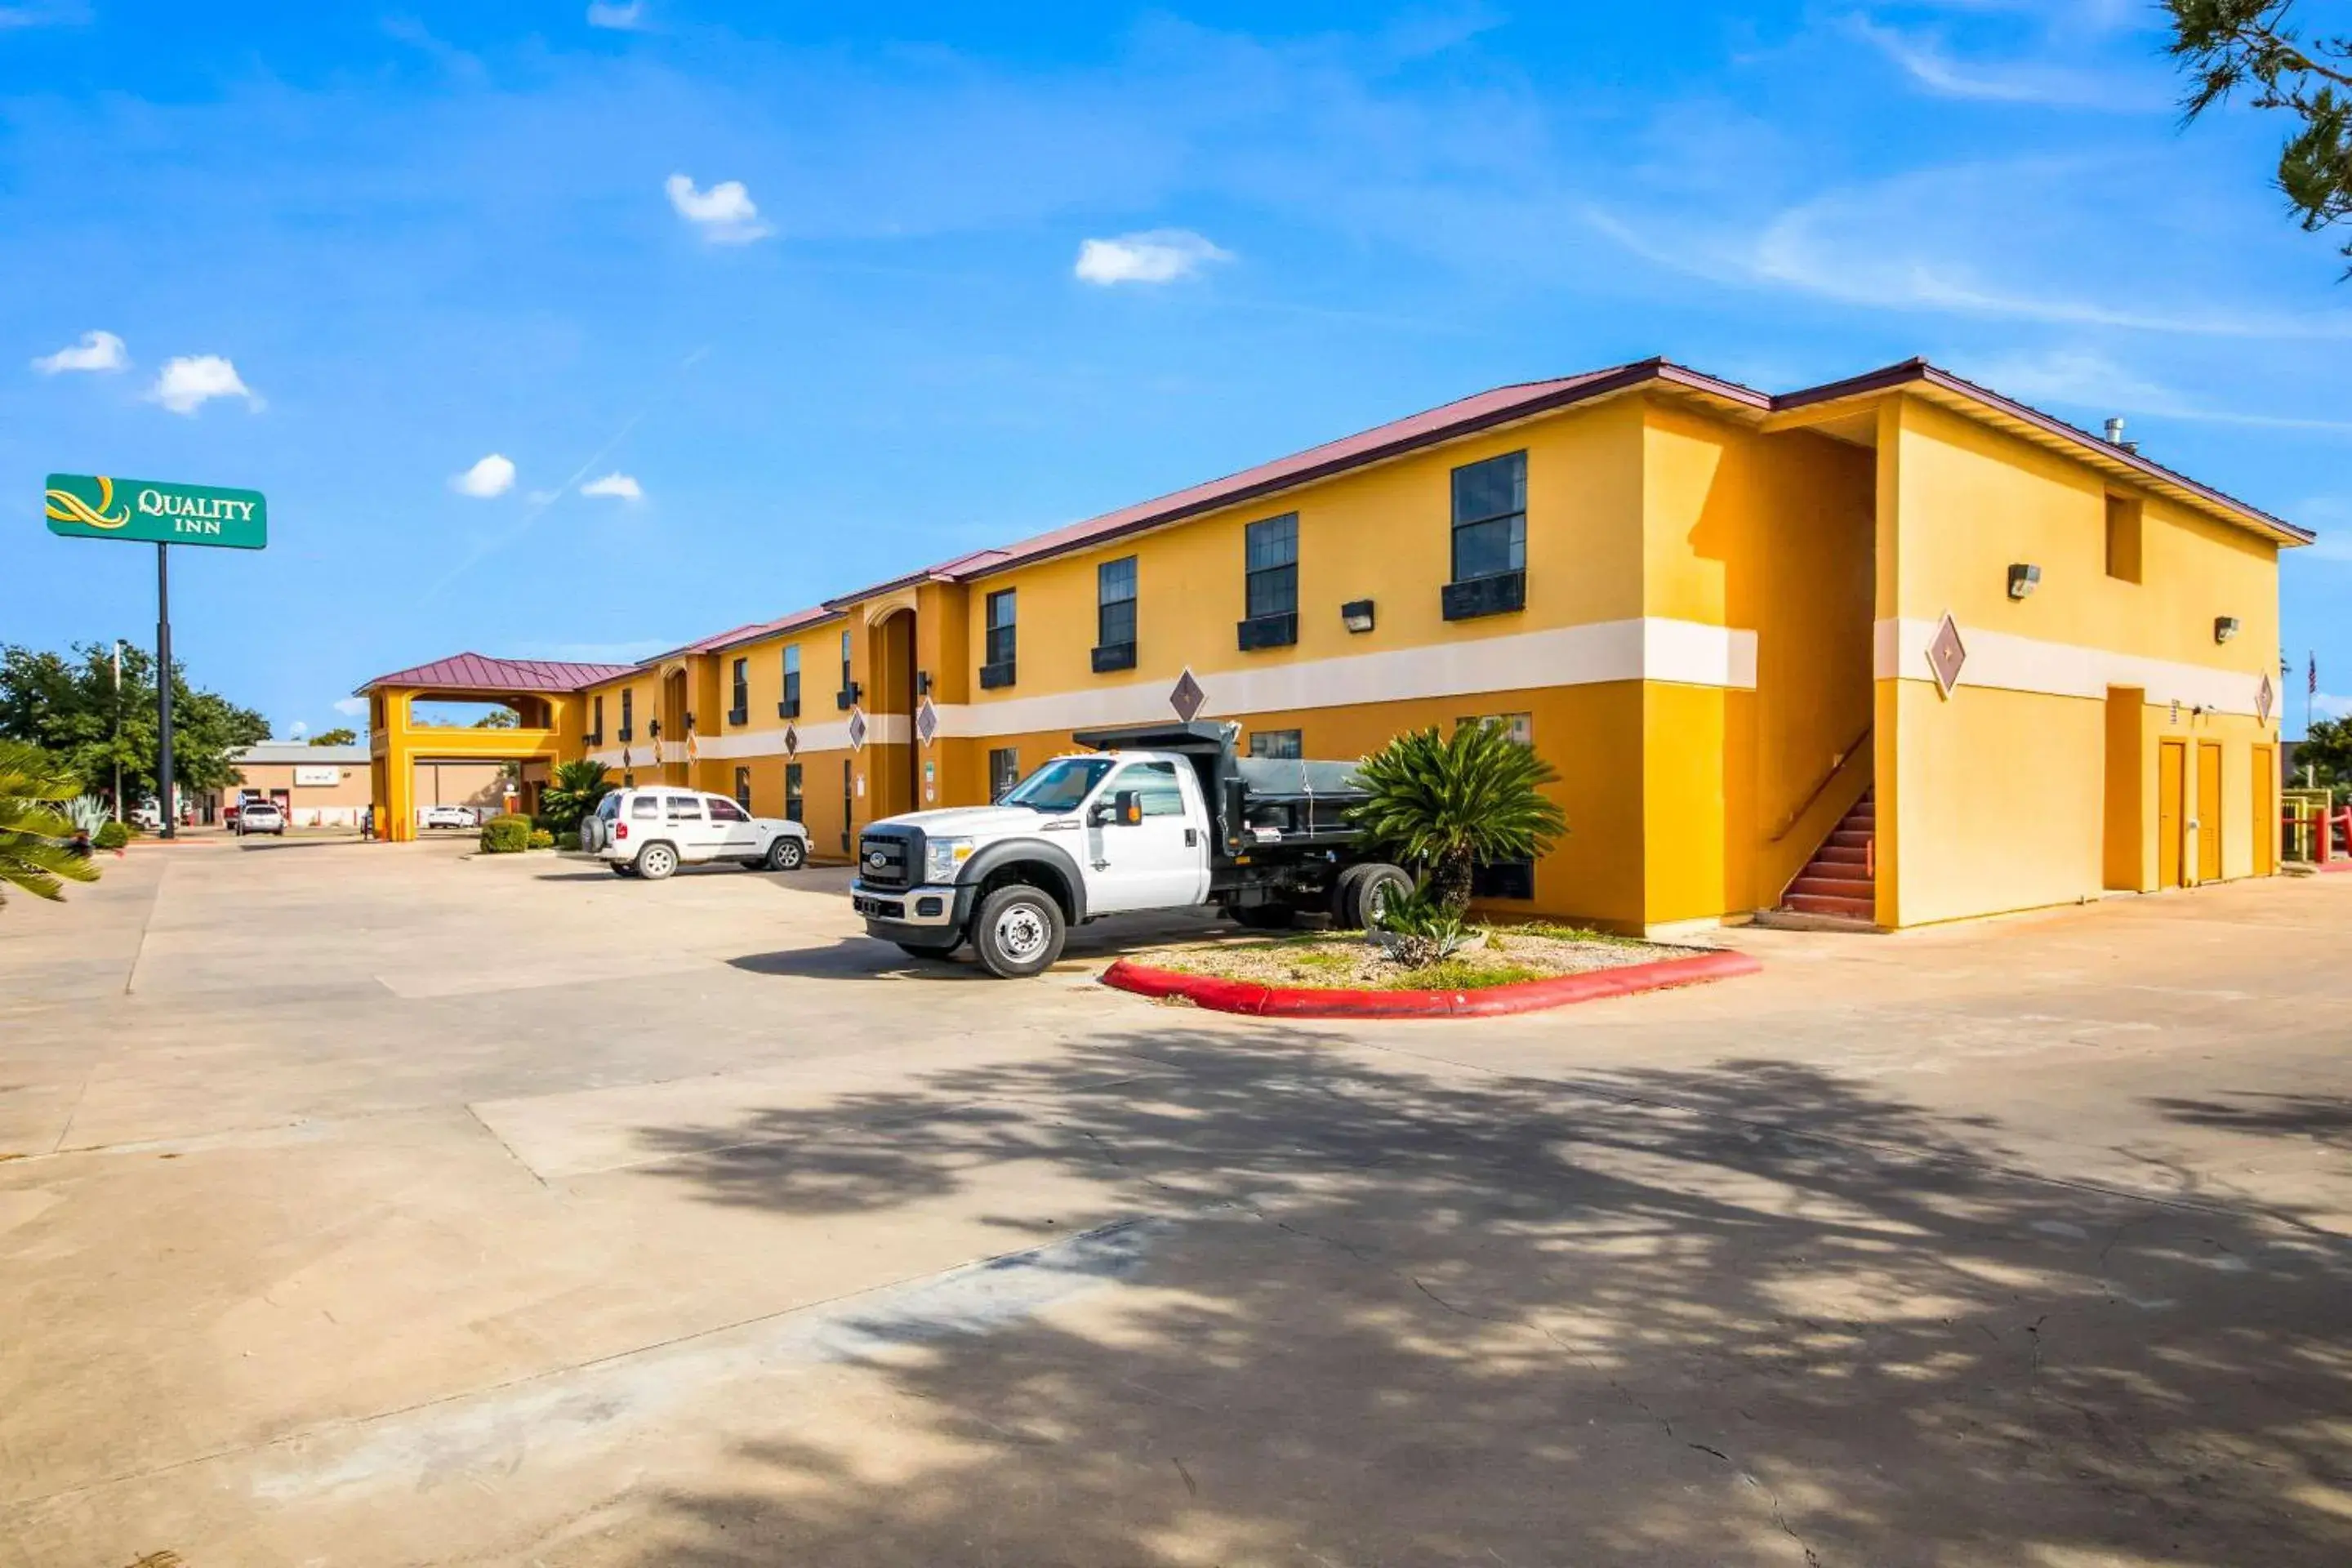 Property Building in Quality Inn Bastrop